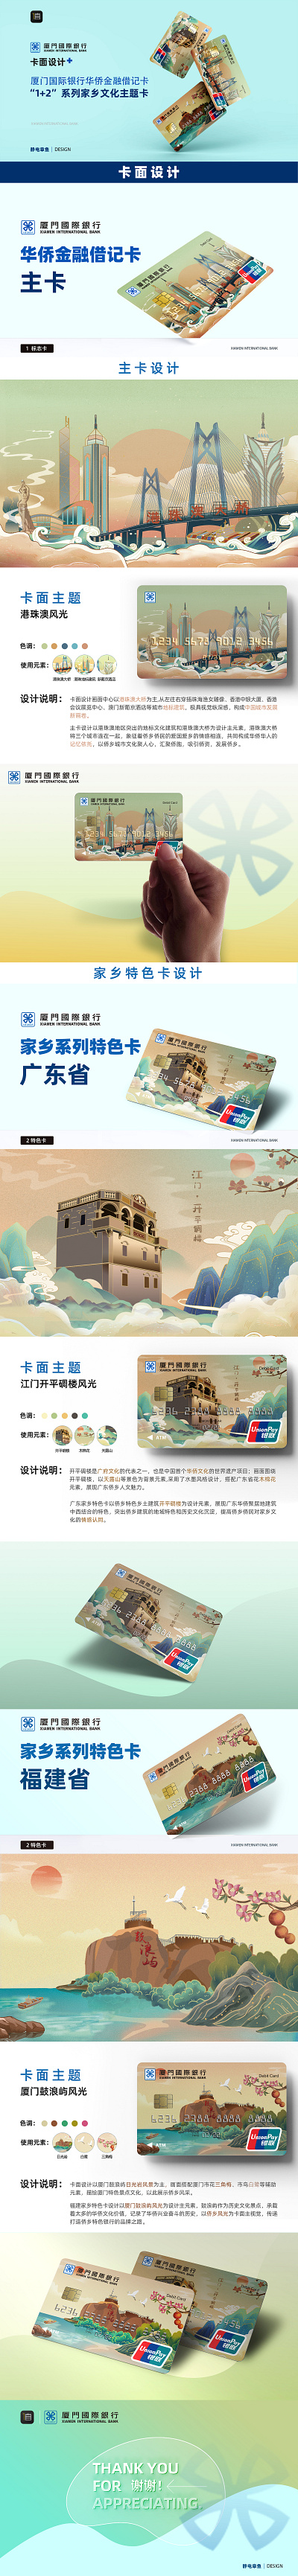 Chinese style bank card illustration 厦门国际银行“华侨金融”银行卡卡面设计 branding characteristic buildings graphic design home town of overseas chinese hometown illustration overseas chinese scenic spot